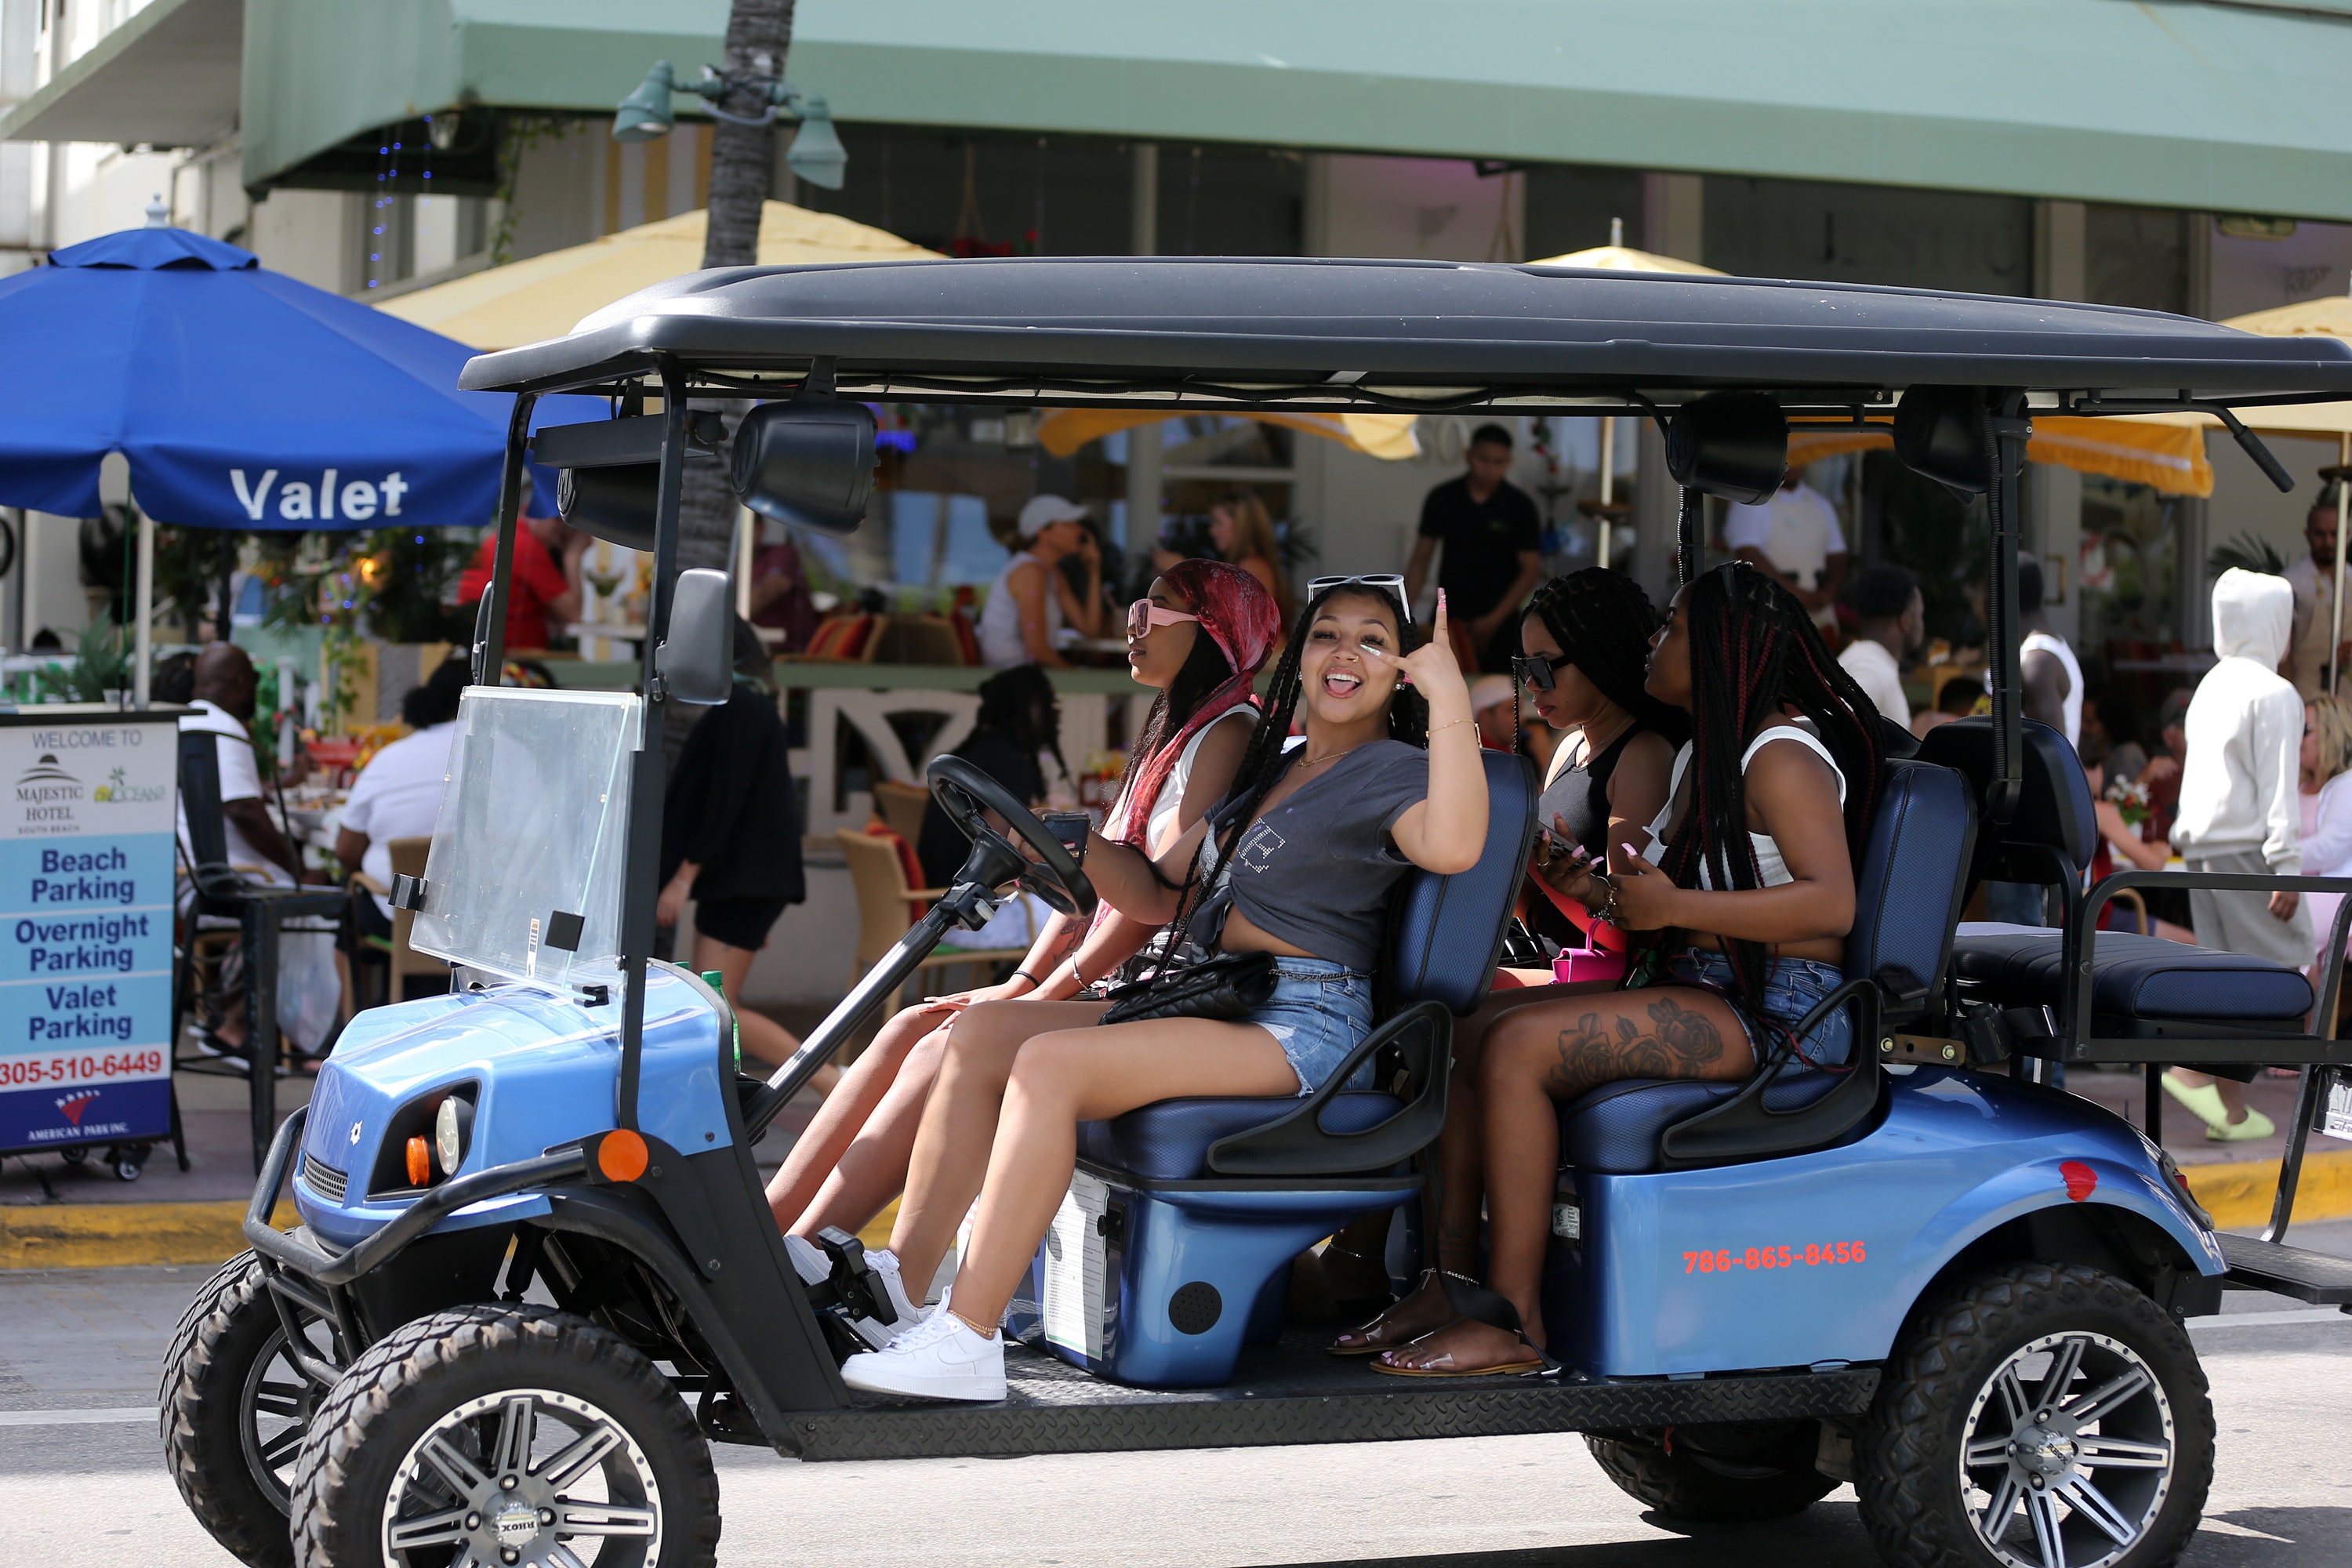 Miami Beach to impose spring break curfew this week after two shootings thumbnail